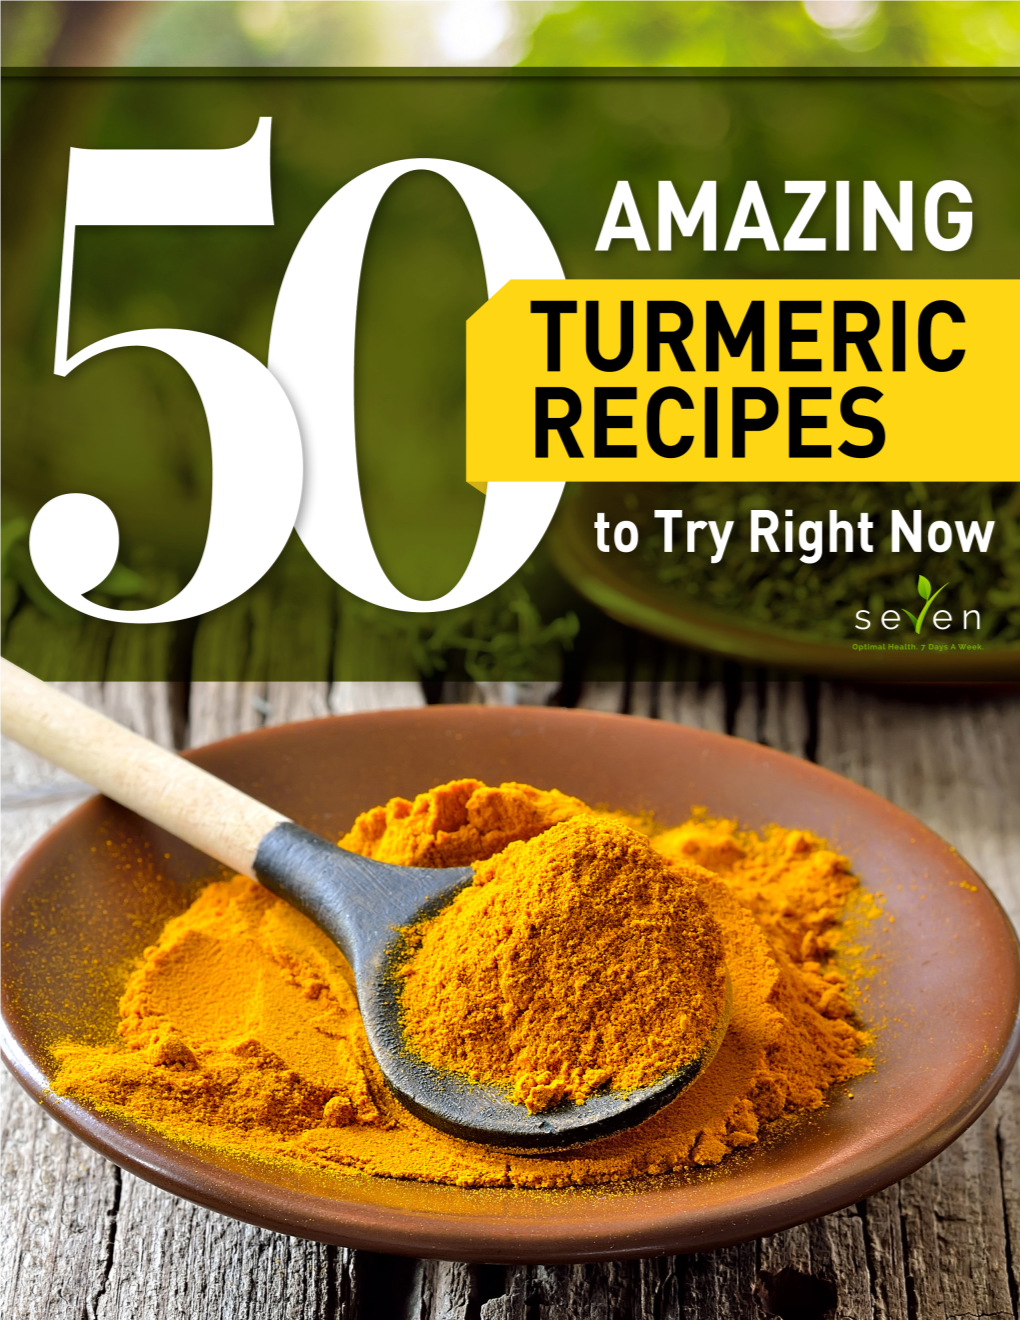 50 Amazing Turmeric Recipes to Try Right Now